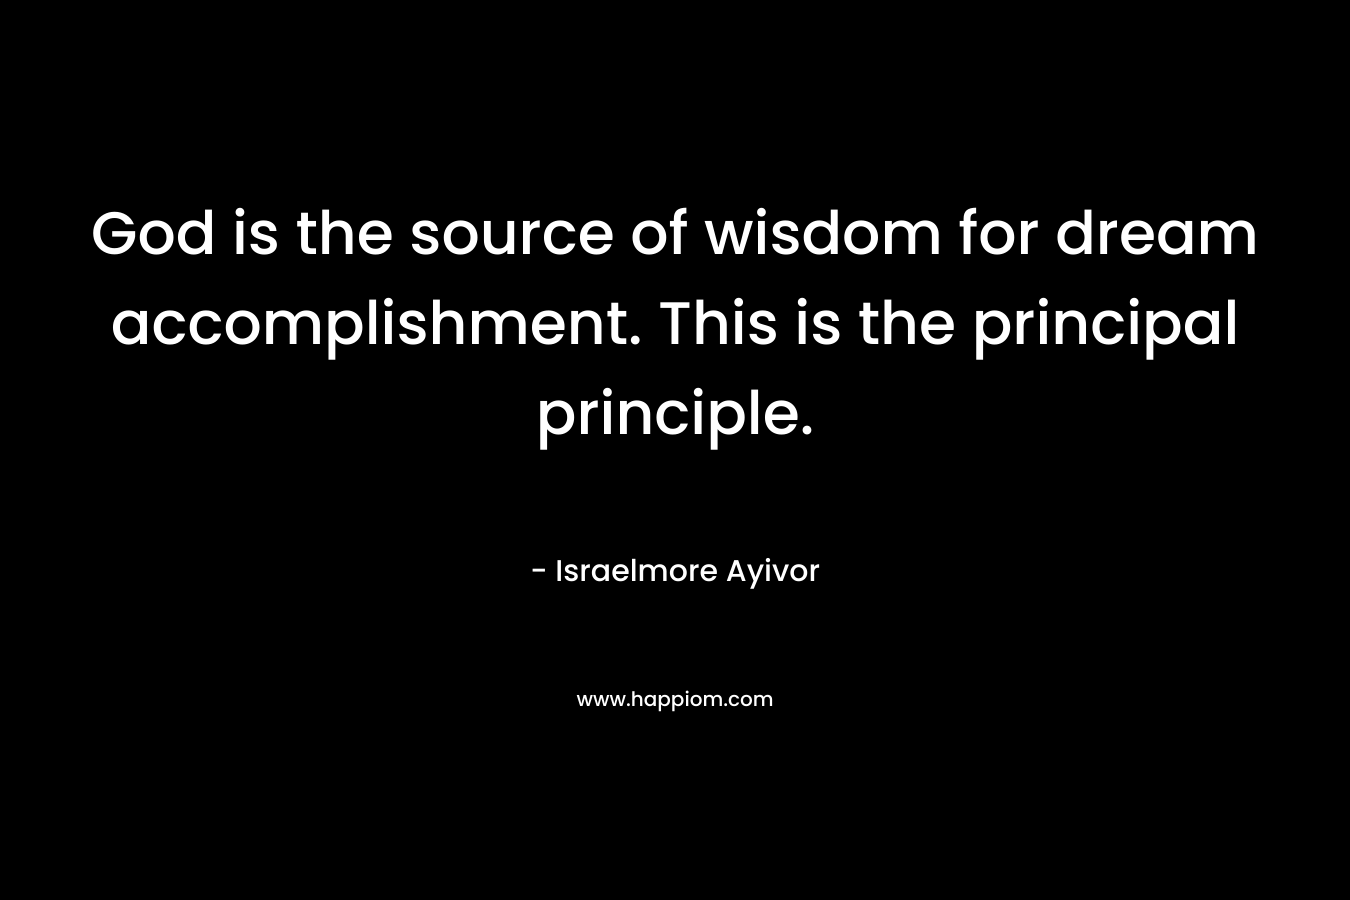 God is the source of wisdom for dream accomplishment. This is the principal principle. – Israelmore Ayivor